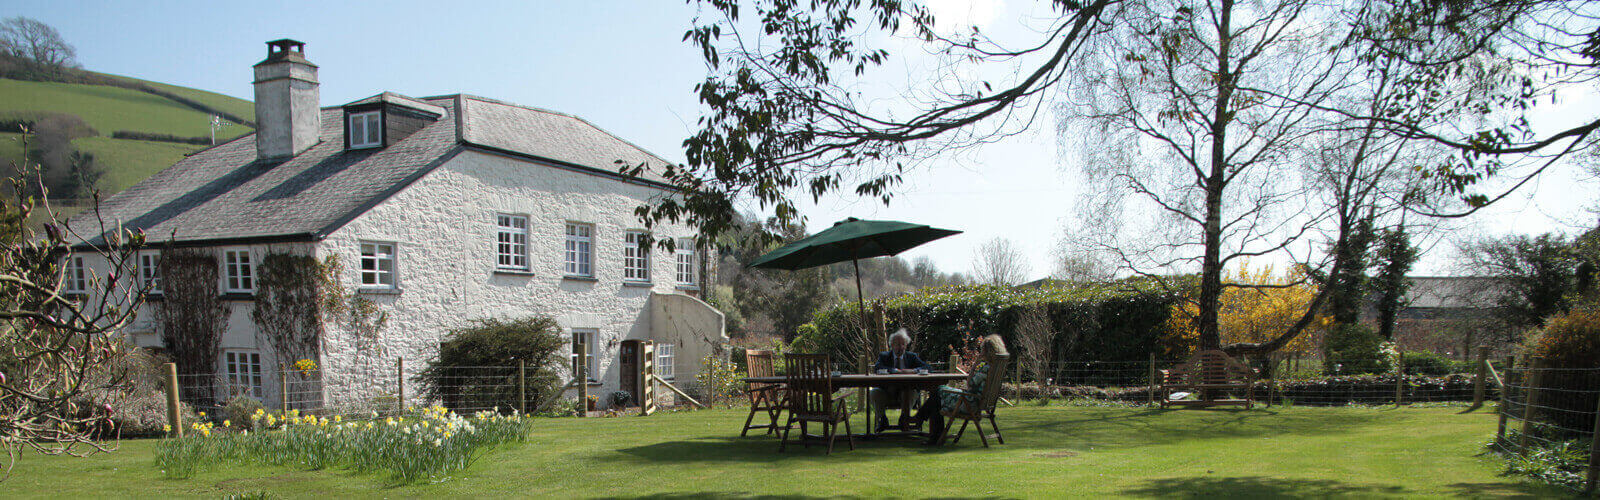 Gages Mill Country Guest House - Asburton